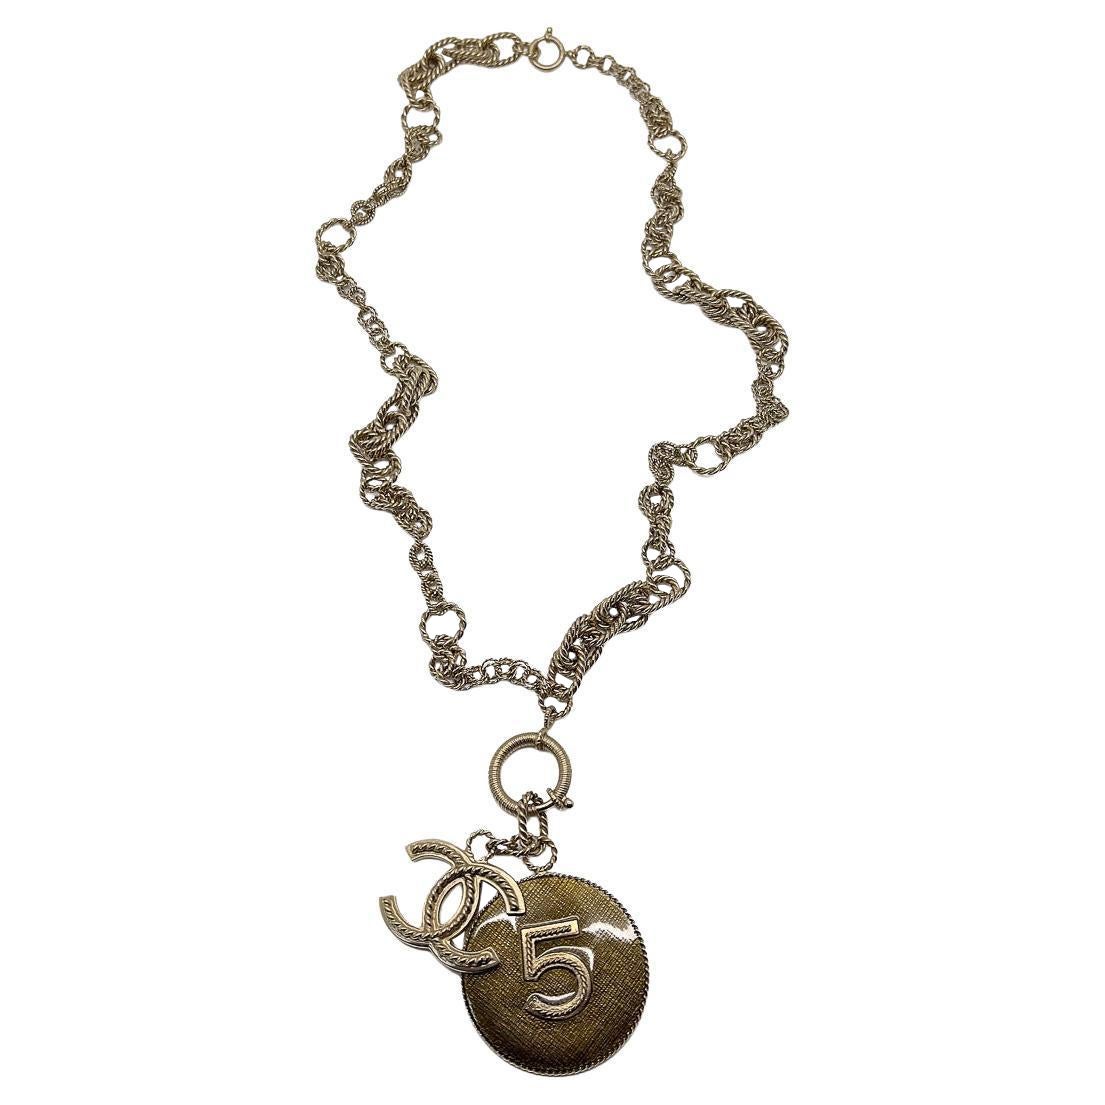 Vintage Chanel Statement No. 5 Rope Chain Charm Necklace 2013